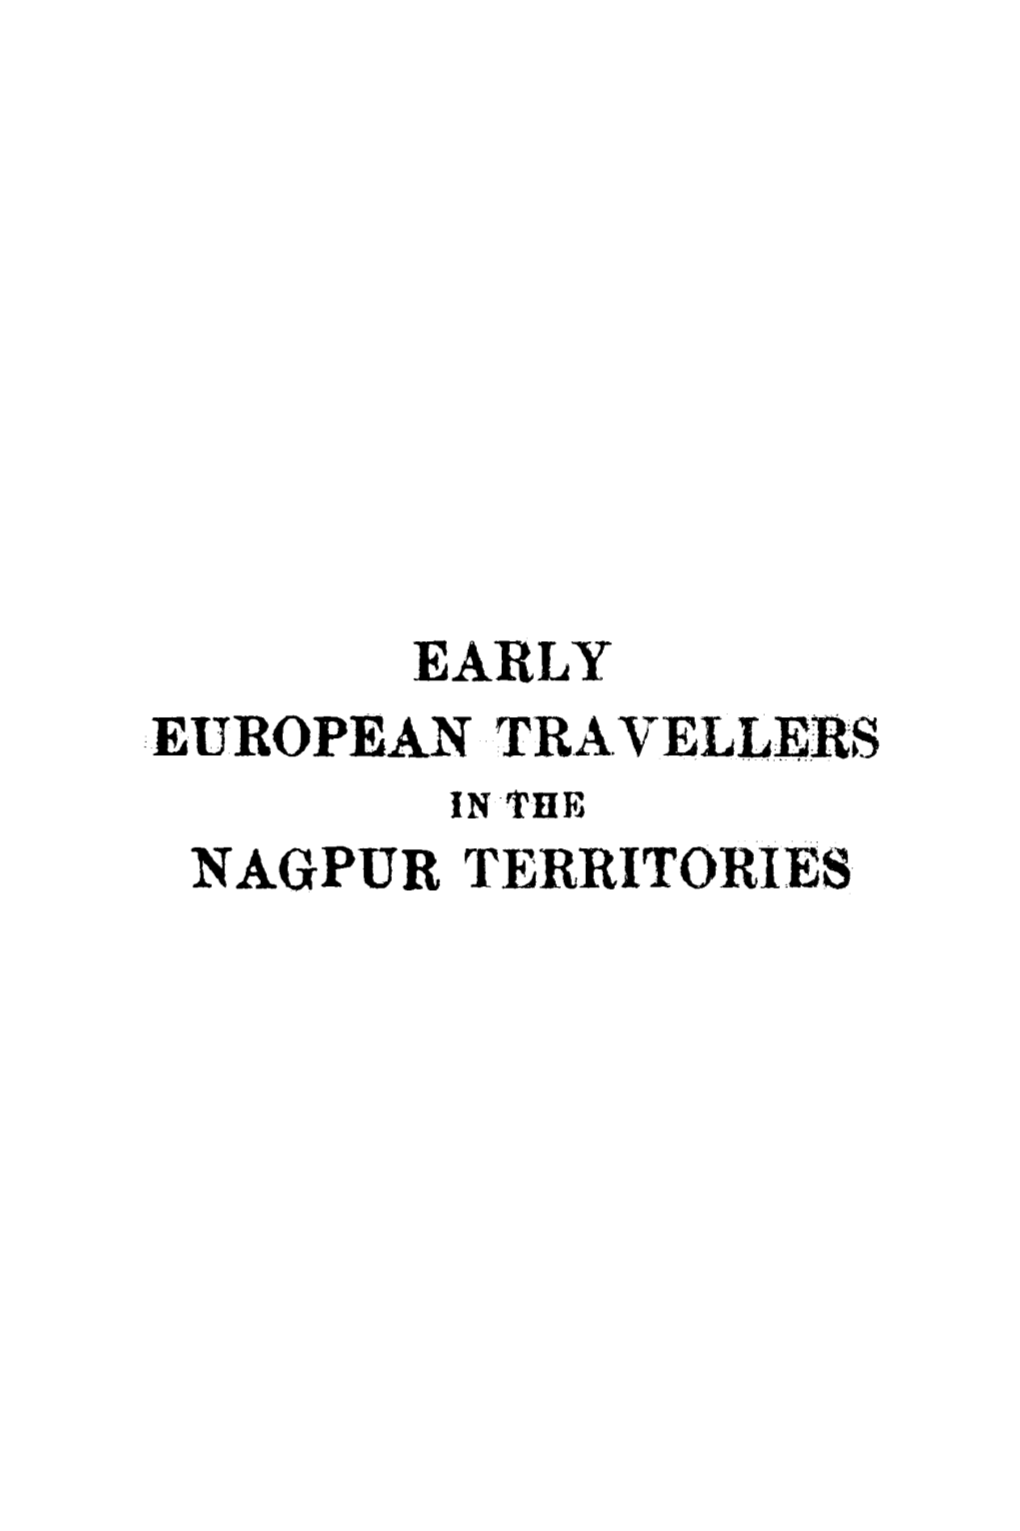 EARLY EUROPEAN TRA -\Rellers in 'L'de NAGPUR TERRITORIES • Early European Travellers in the Nagpur Territories